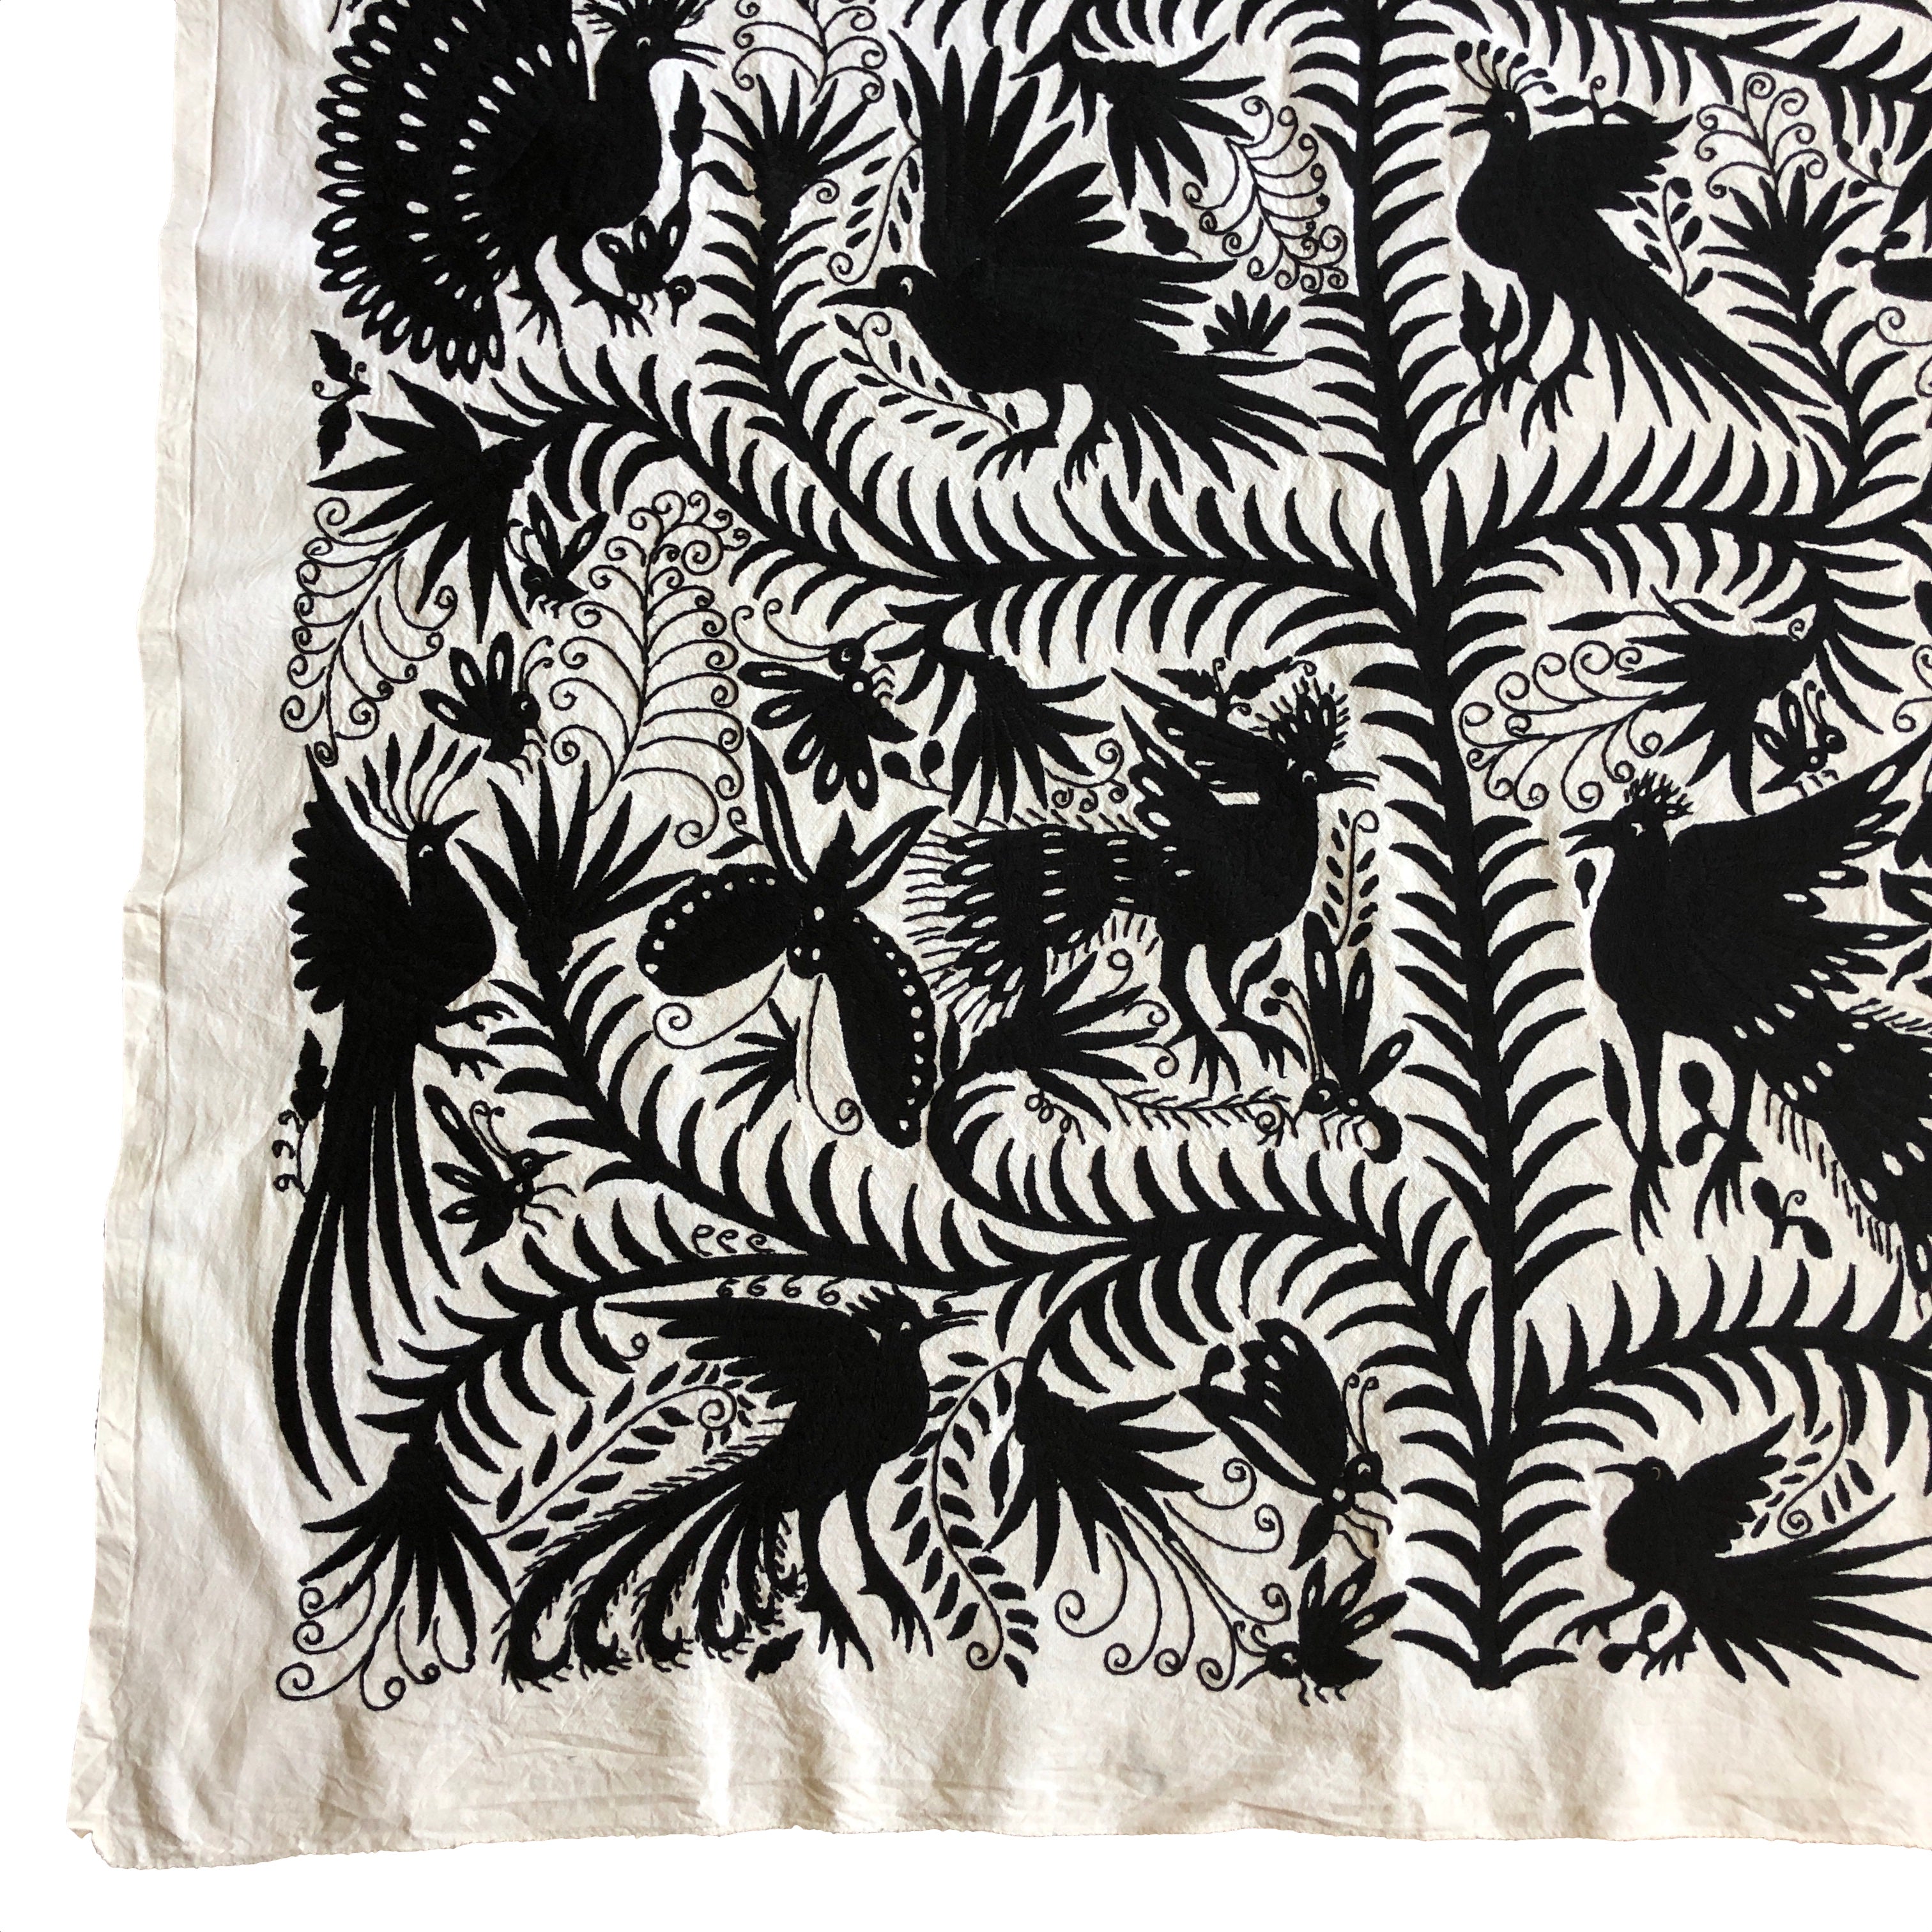 OTOMI tapestry/ Wall hanging BLACK